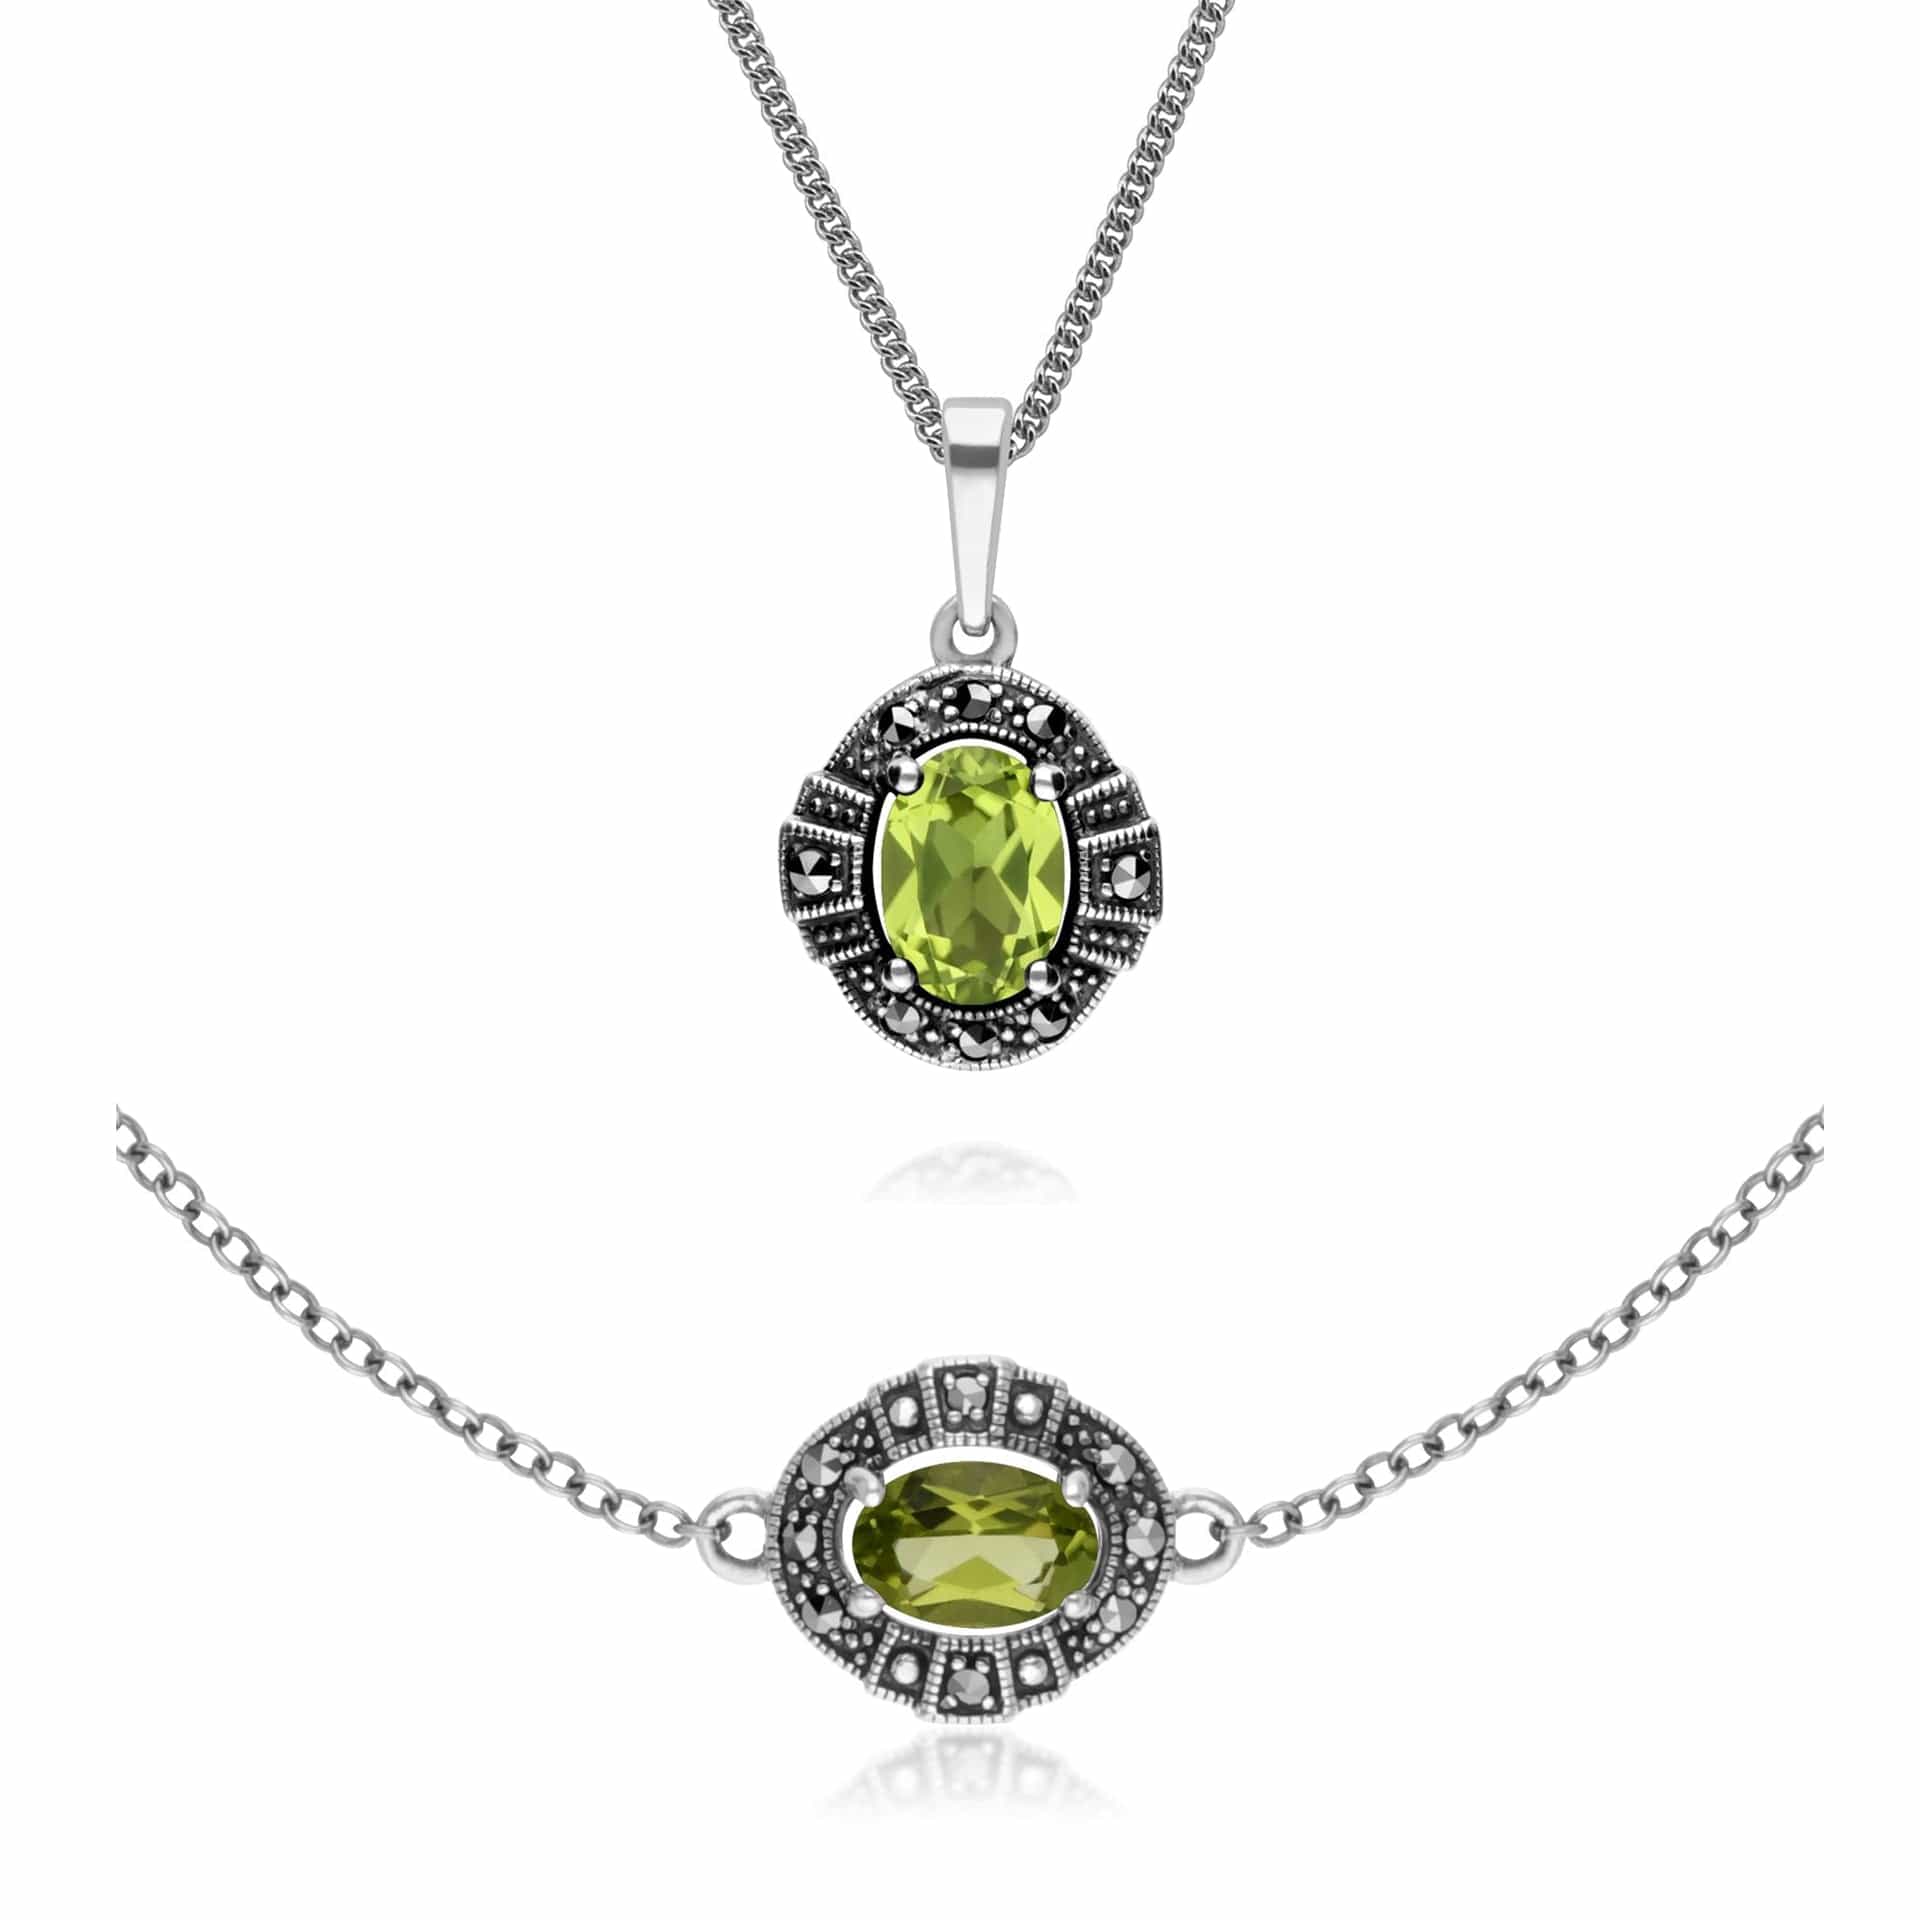 214P303304925-214L165404925 Art Deco Style Oval Peridot and Marcasite Cluster Bracelet & Pendant Set in 925 Sterling Silver 1